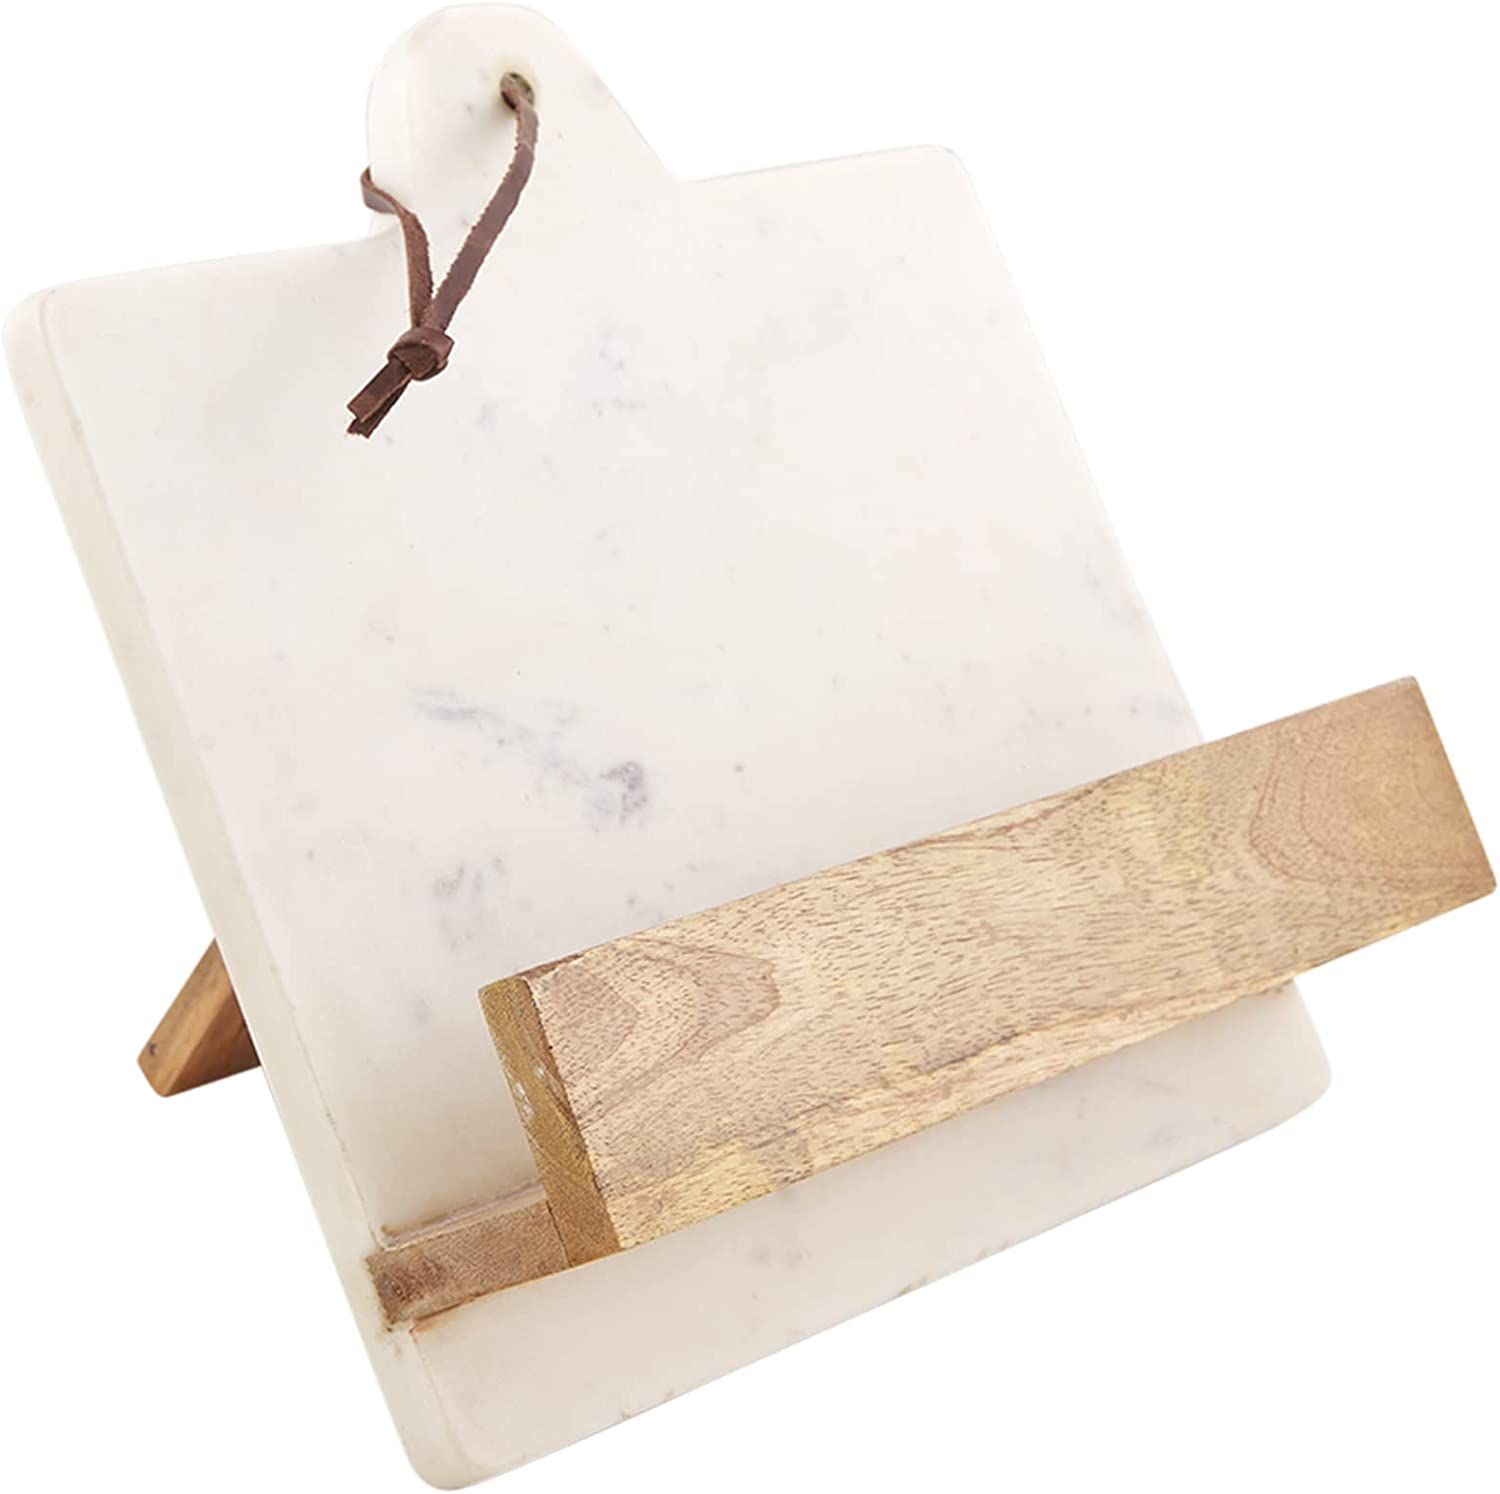 Mud Pie Marble and Wood Cookbook Holder, White/Brown, 11" x 11" | Amazon (US)